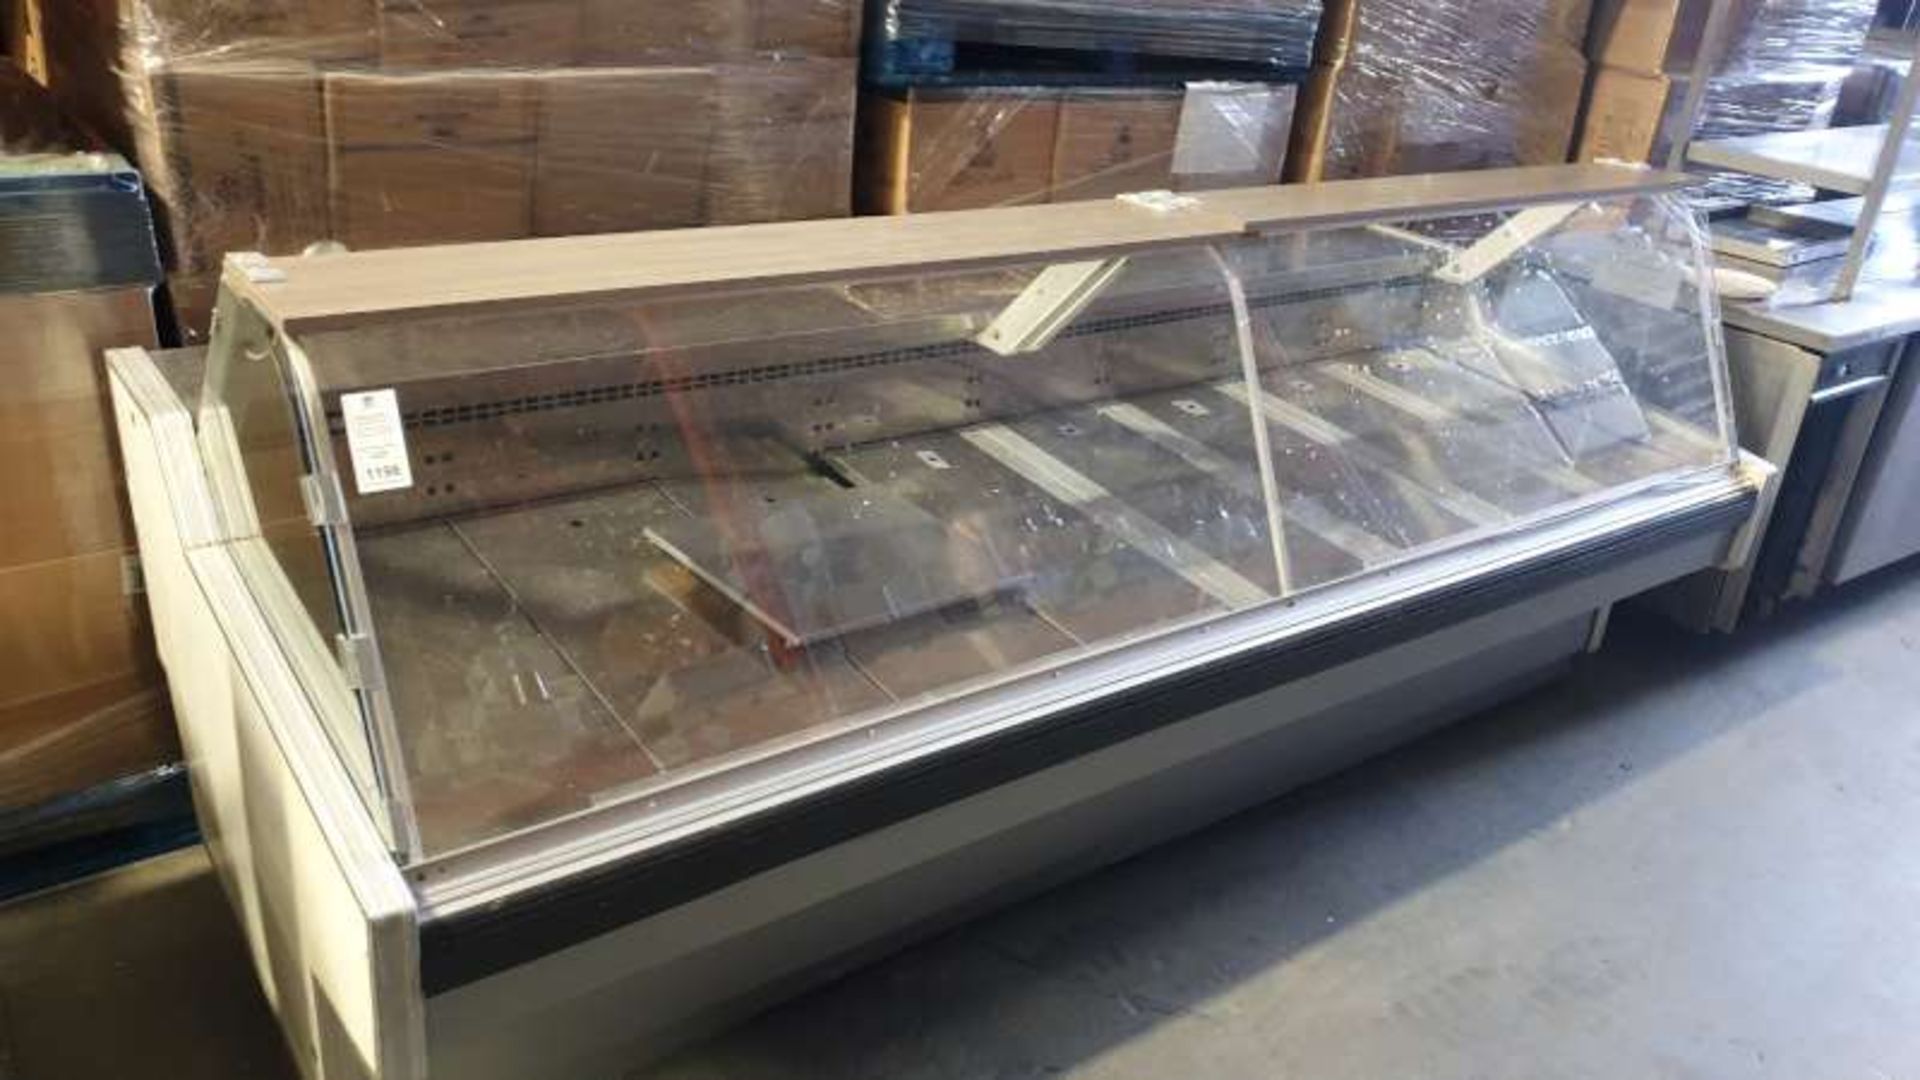 GLASS FRONTED REFRIGERATED DISPLAY UNIT